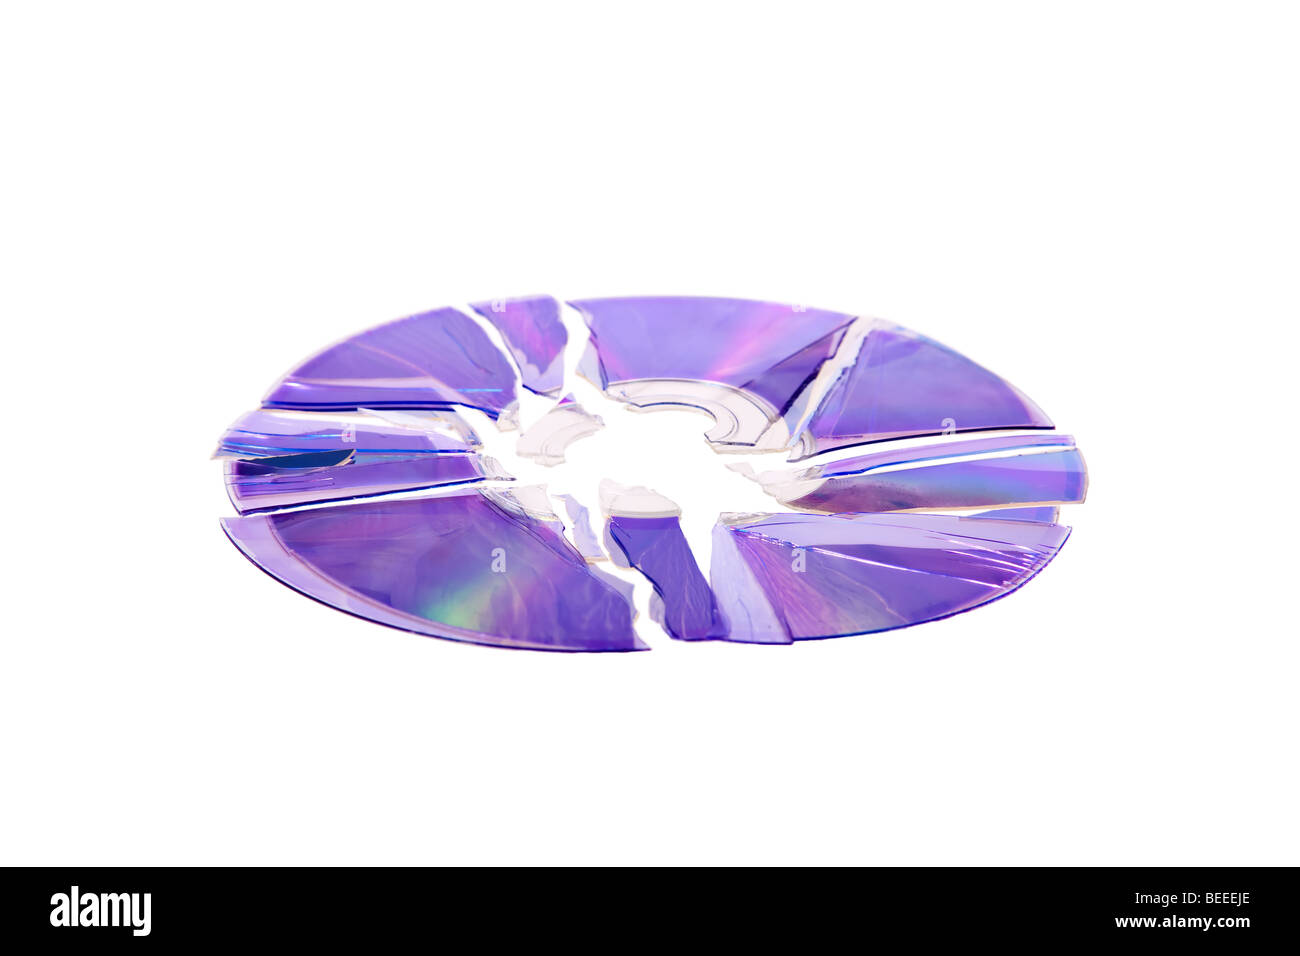 Shattered DVD / CD isolated on a white background Stock Photo